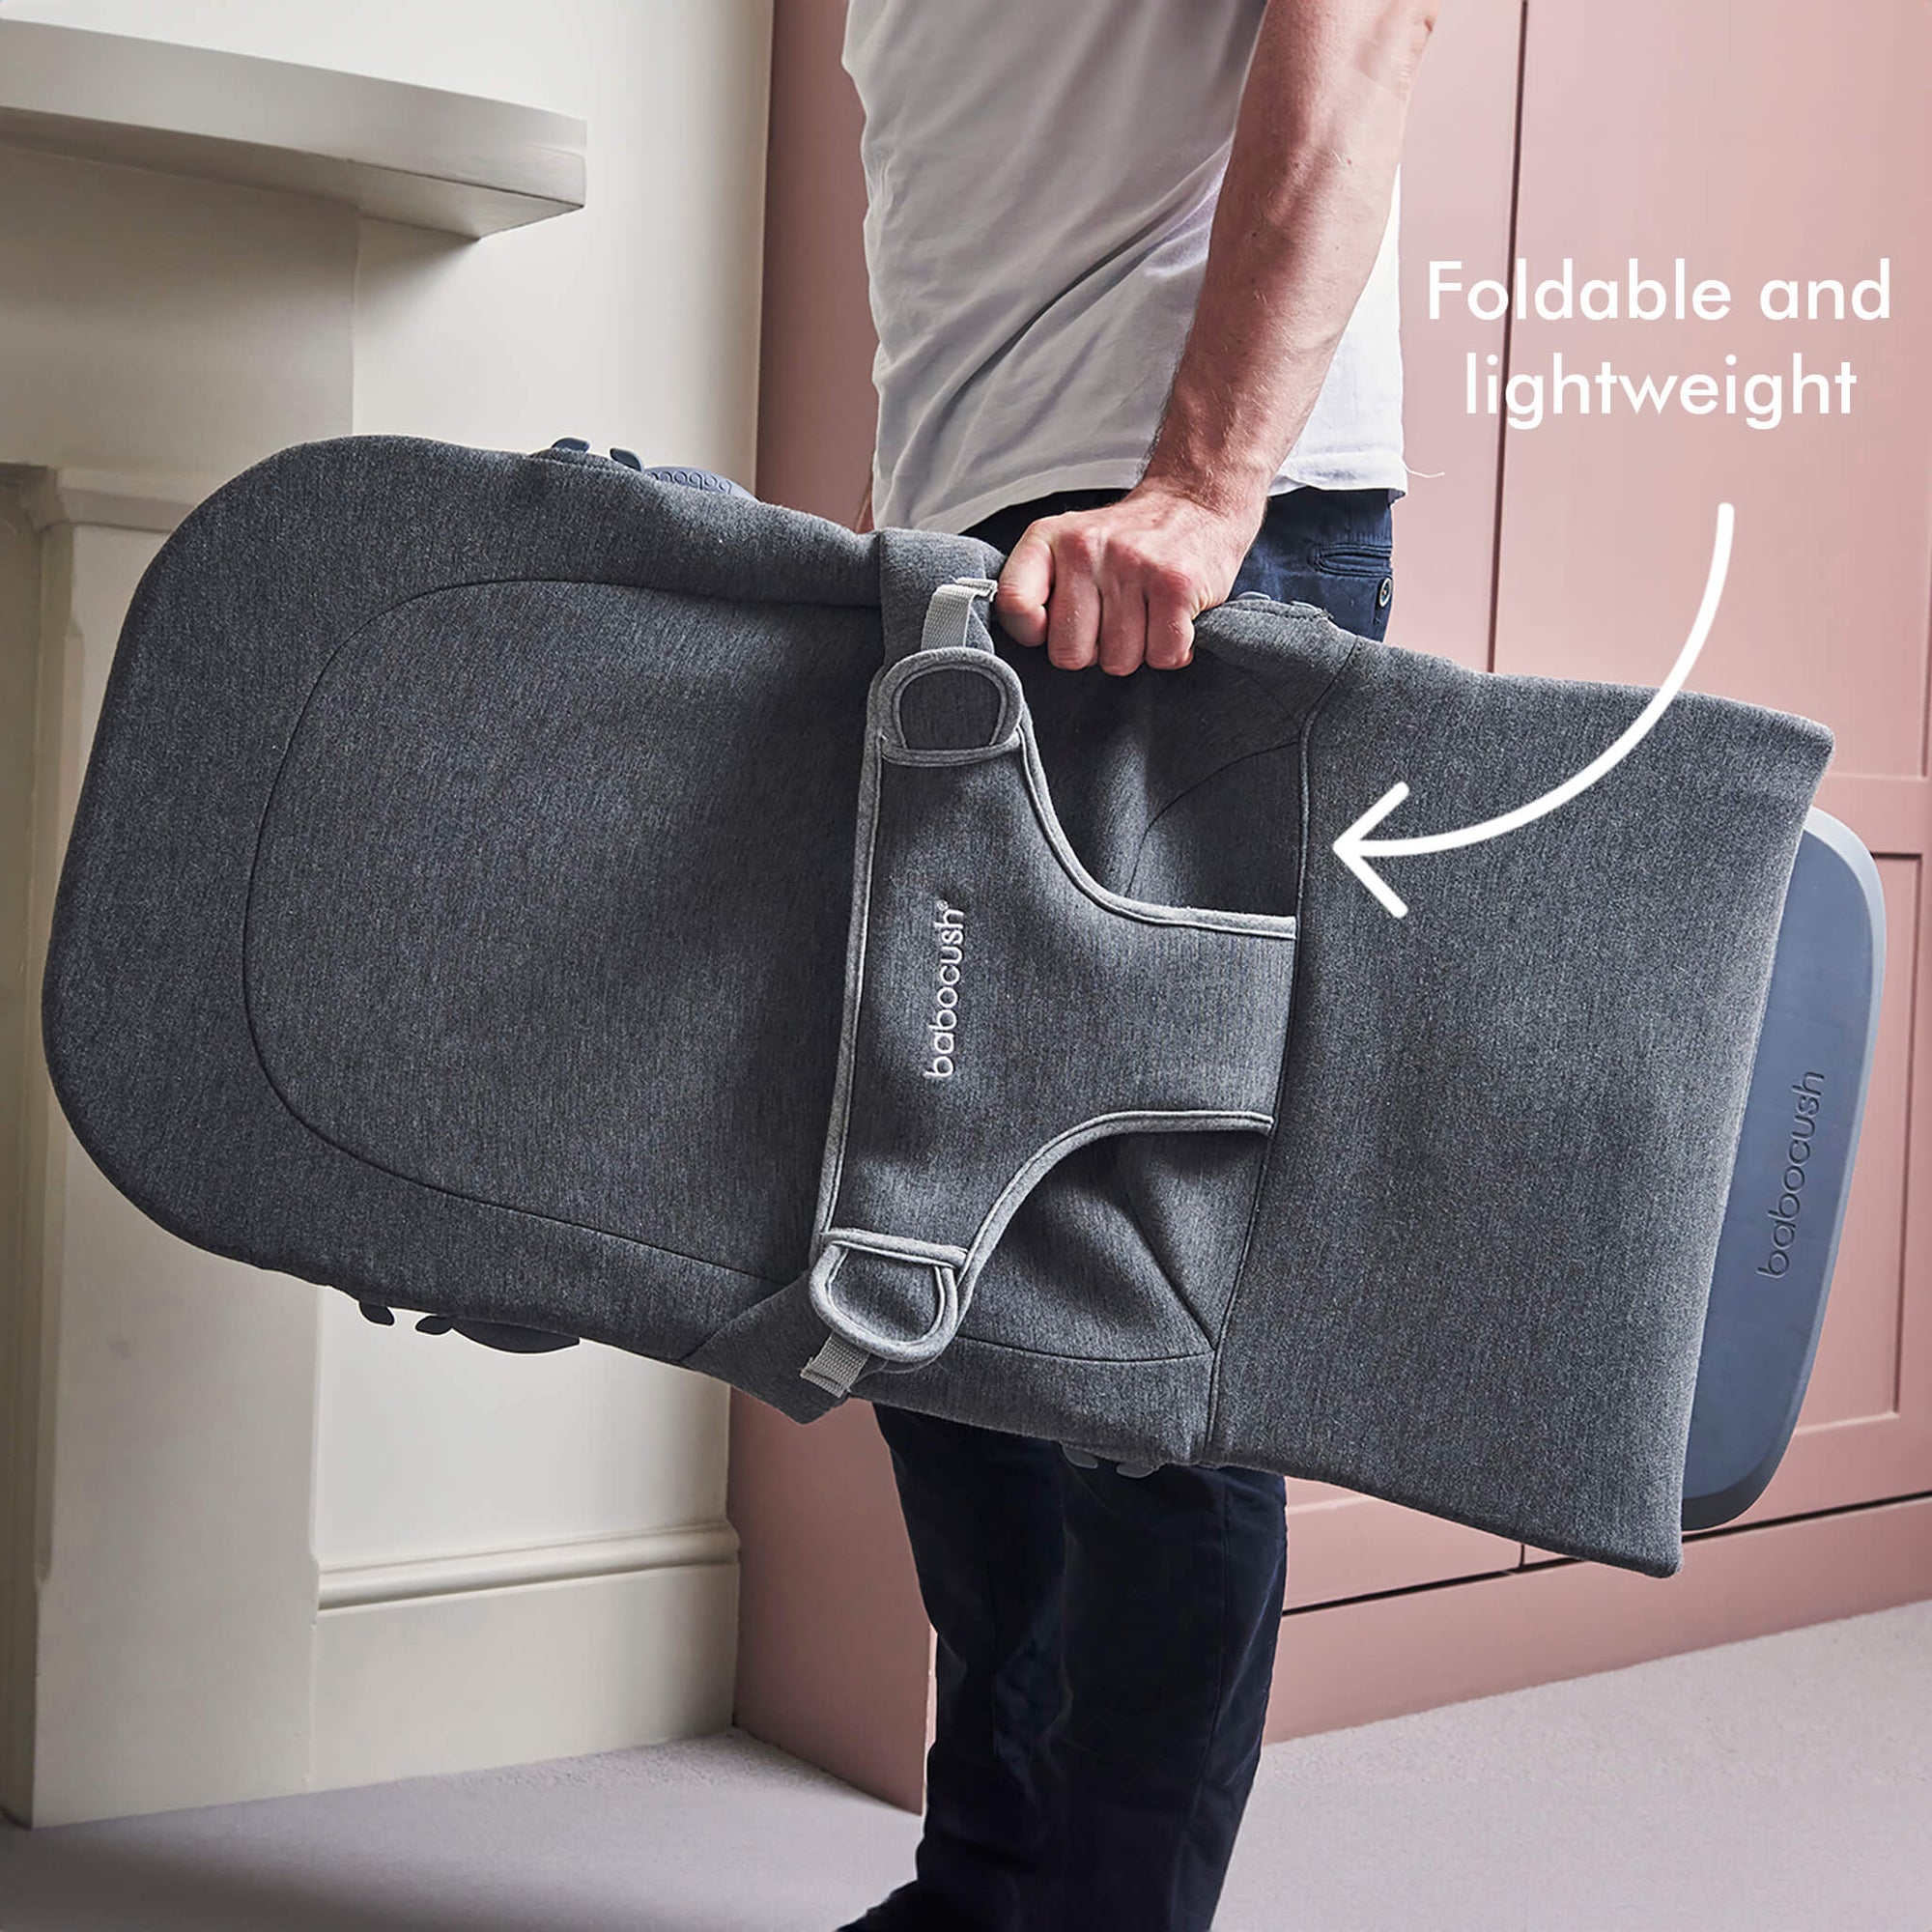 Babocush bouncer is foldable and lightweight